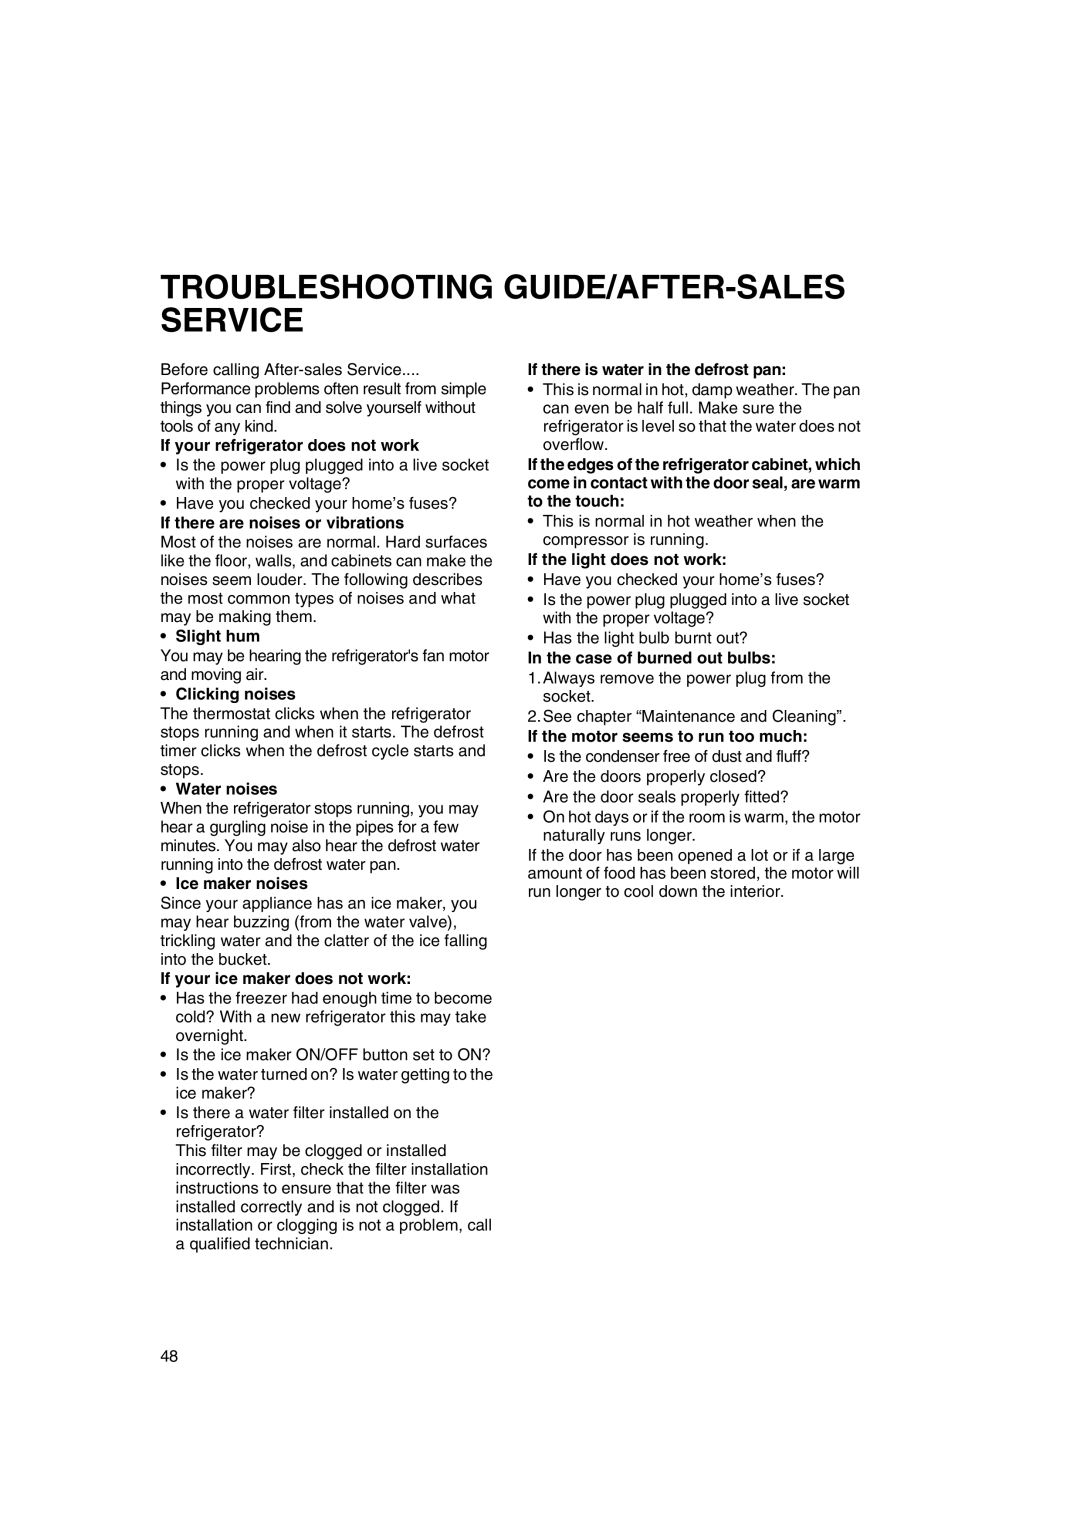 Smeg FA550X Troubleshooting Guide/After-Sales Service, If your refrigerator does not work, Slight hum, Clicking noises 